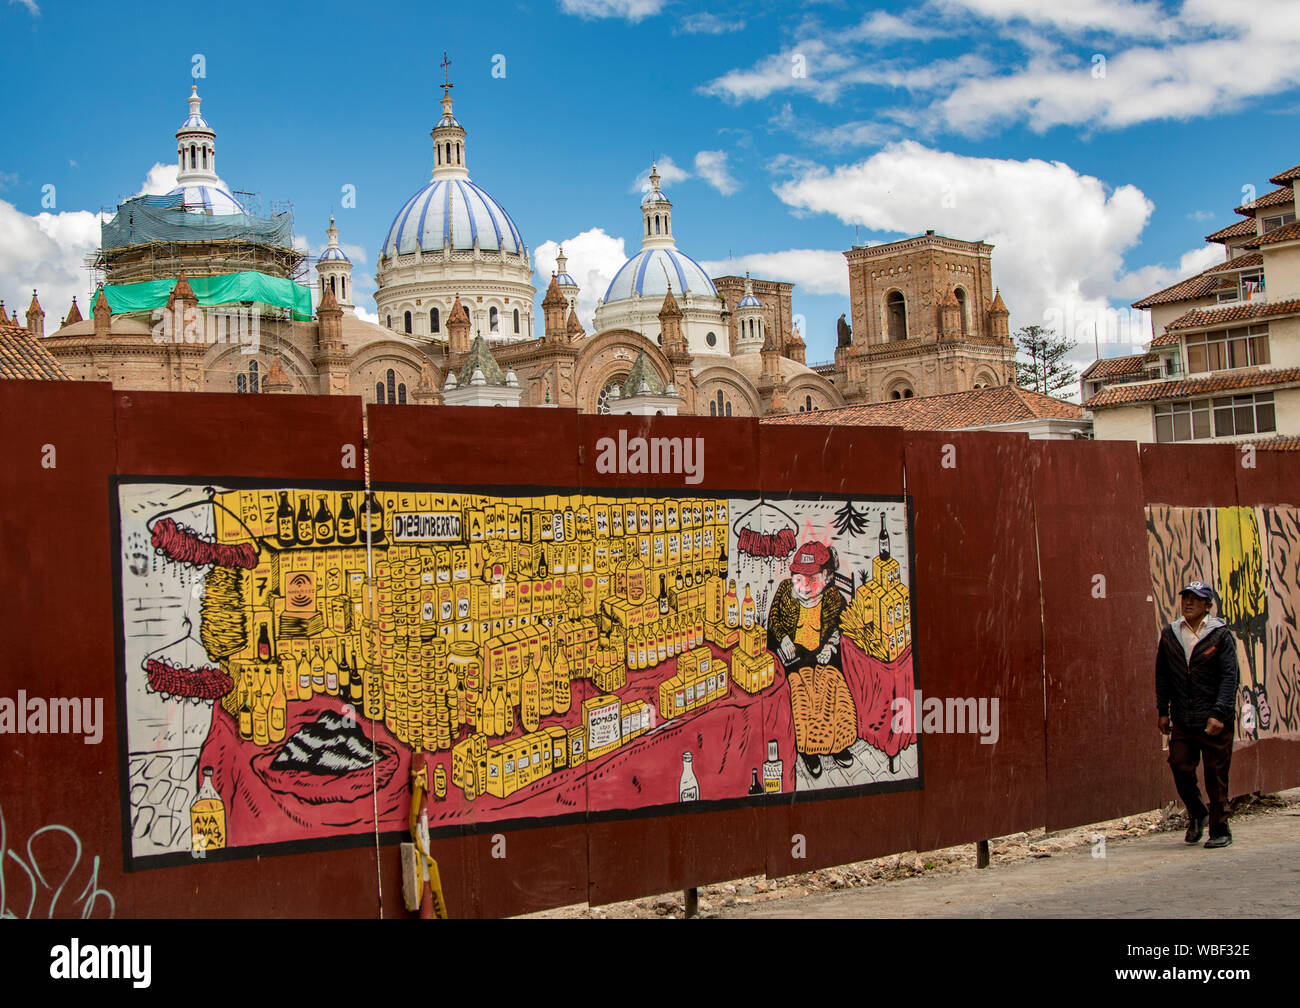 Cuenca, Ecuador, Dec 24, 2017 - Man walks past construction barrier with mural painted, and Cathedral domes in the background Stock Photo